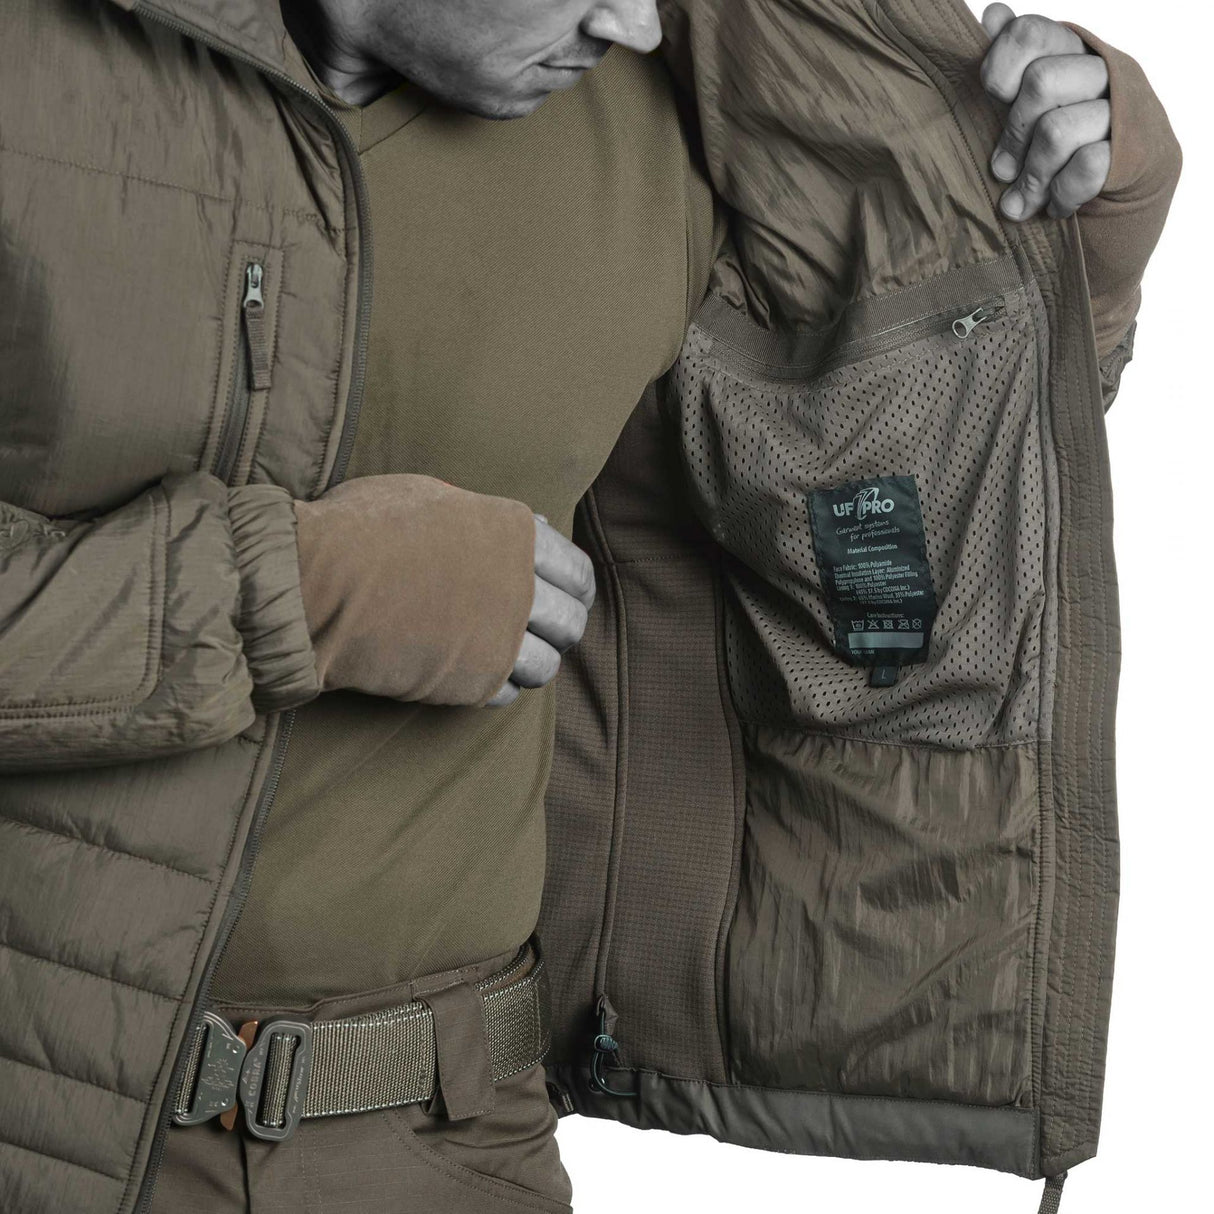 Access essentials easily with Delta ML Gen.2 Tactical Winter Jacket. Easy-open pocket with Velcro cover on the upper arm.